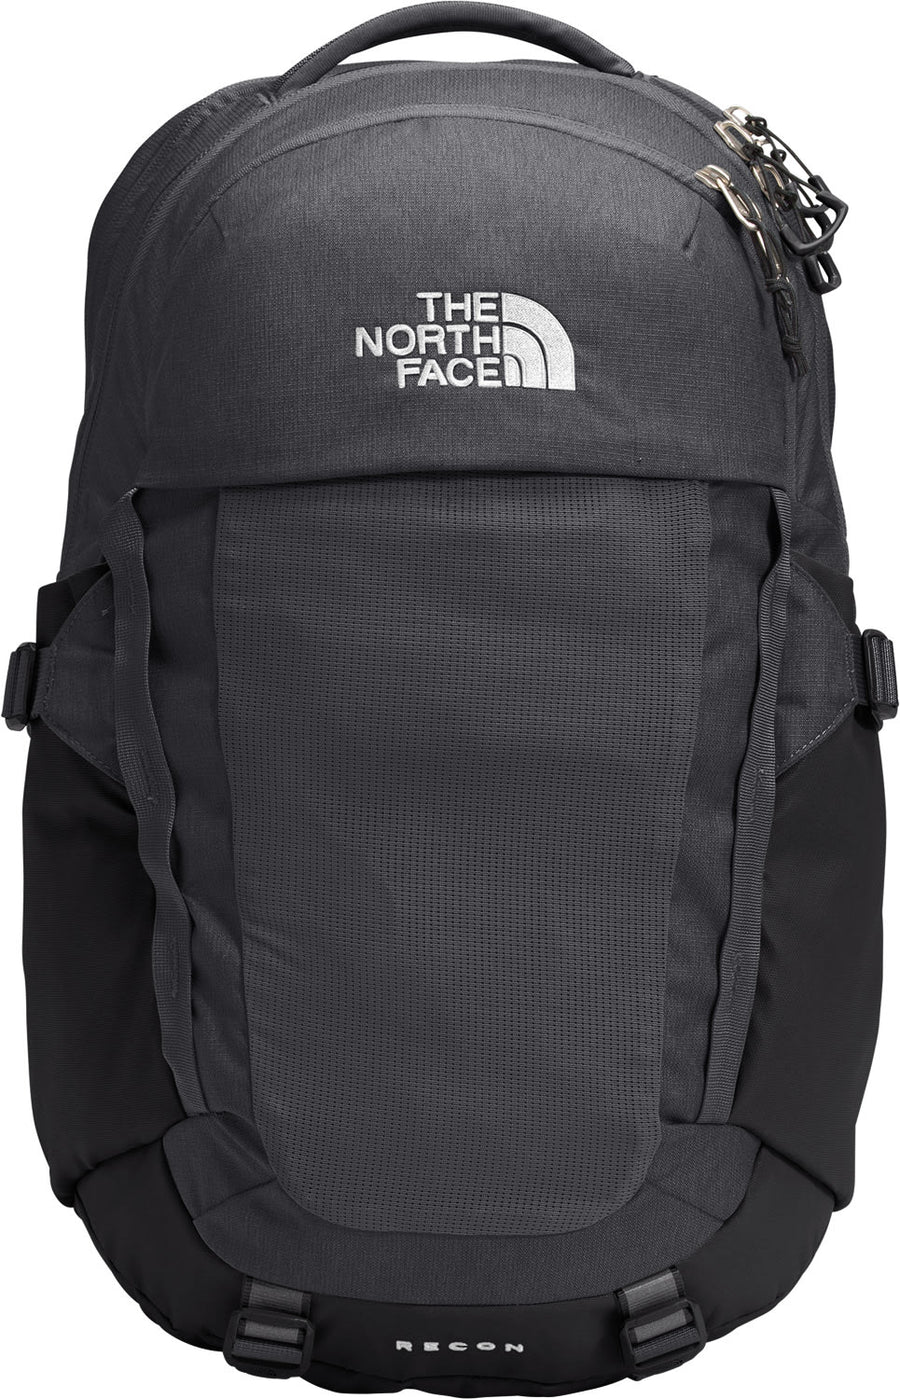 The North Face Recon Backpack Accessories North Face Asphalt Grey Light Heather/TNF Black-YLM  